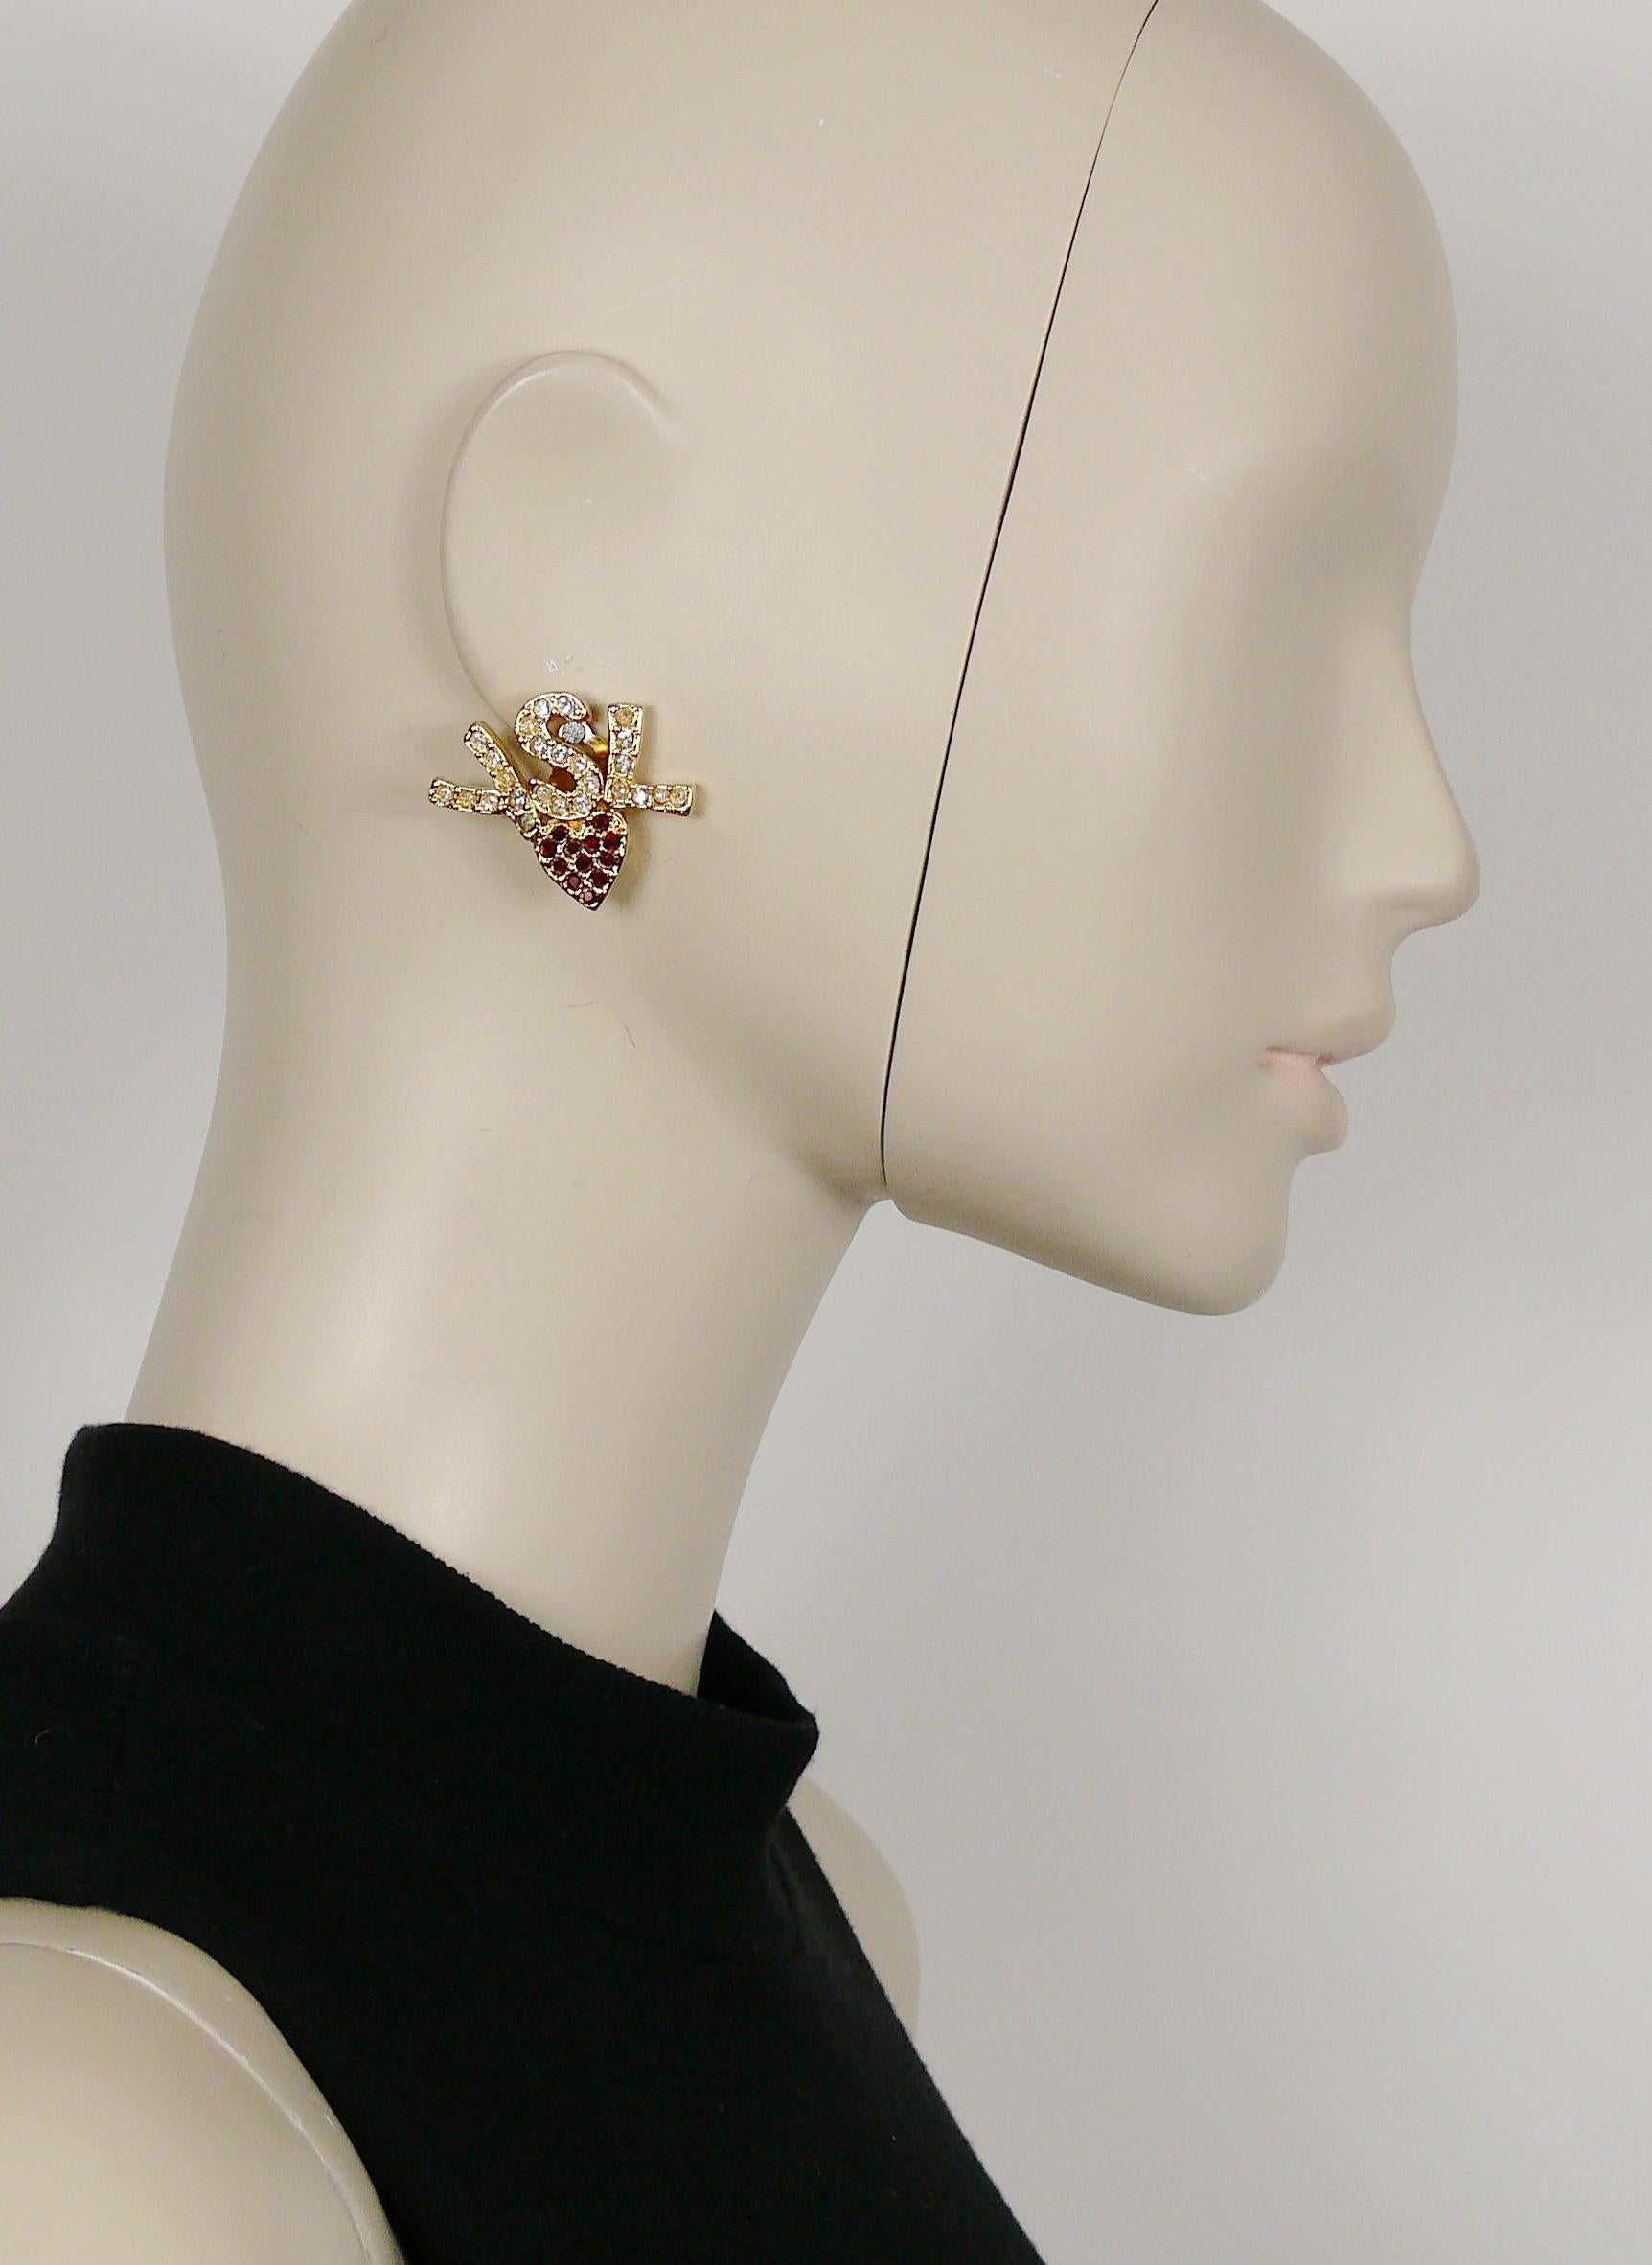 YVES SAINT LAURENT vintage iconic gold toned initials heart clip-on earrings embellished with clear and ruby crystals.

Embossed YSL Made in France.

Indicative measurements : height approx. 3 cm (1.18 inches) / max. width approx. 3.5 cm (1.38